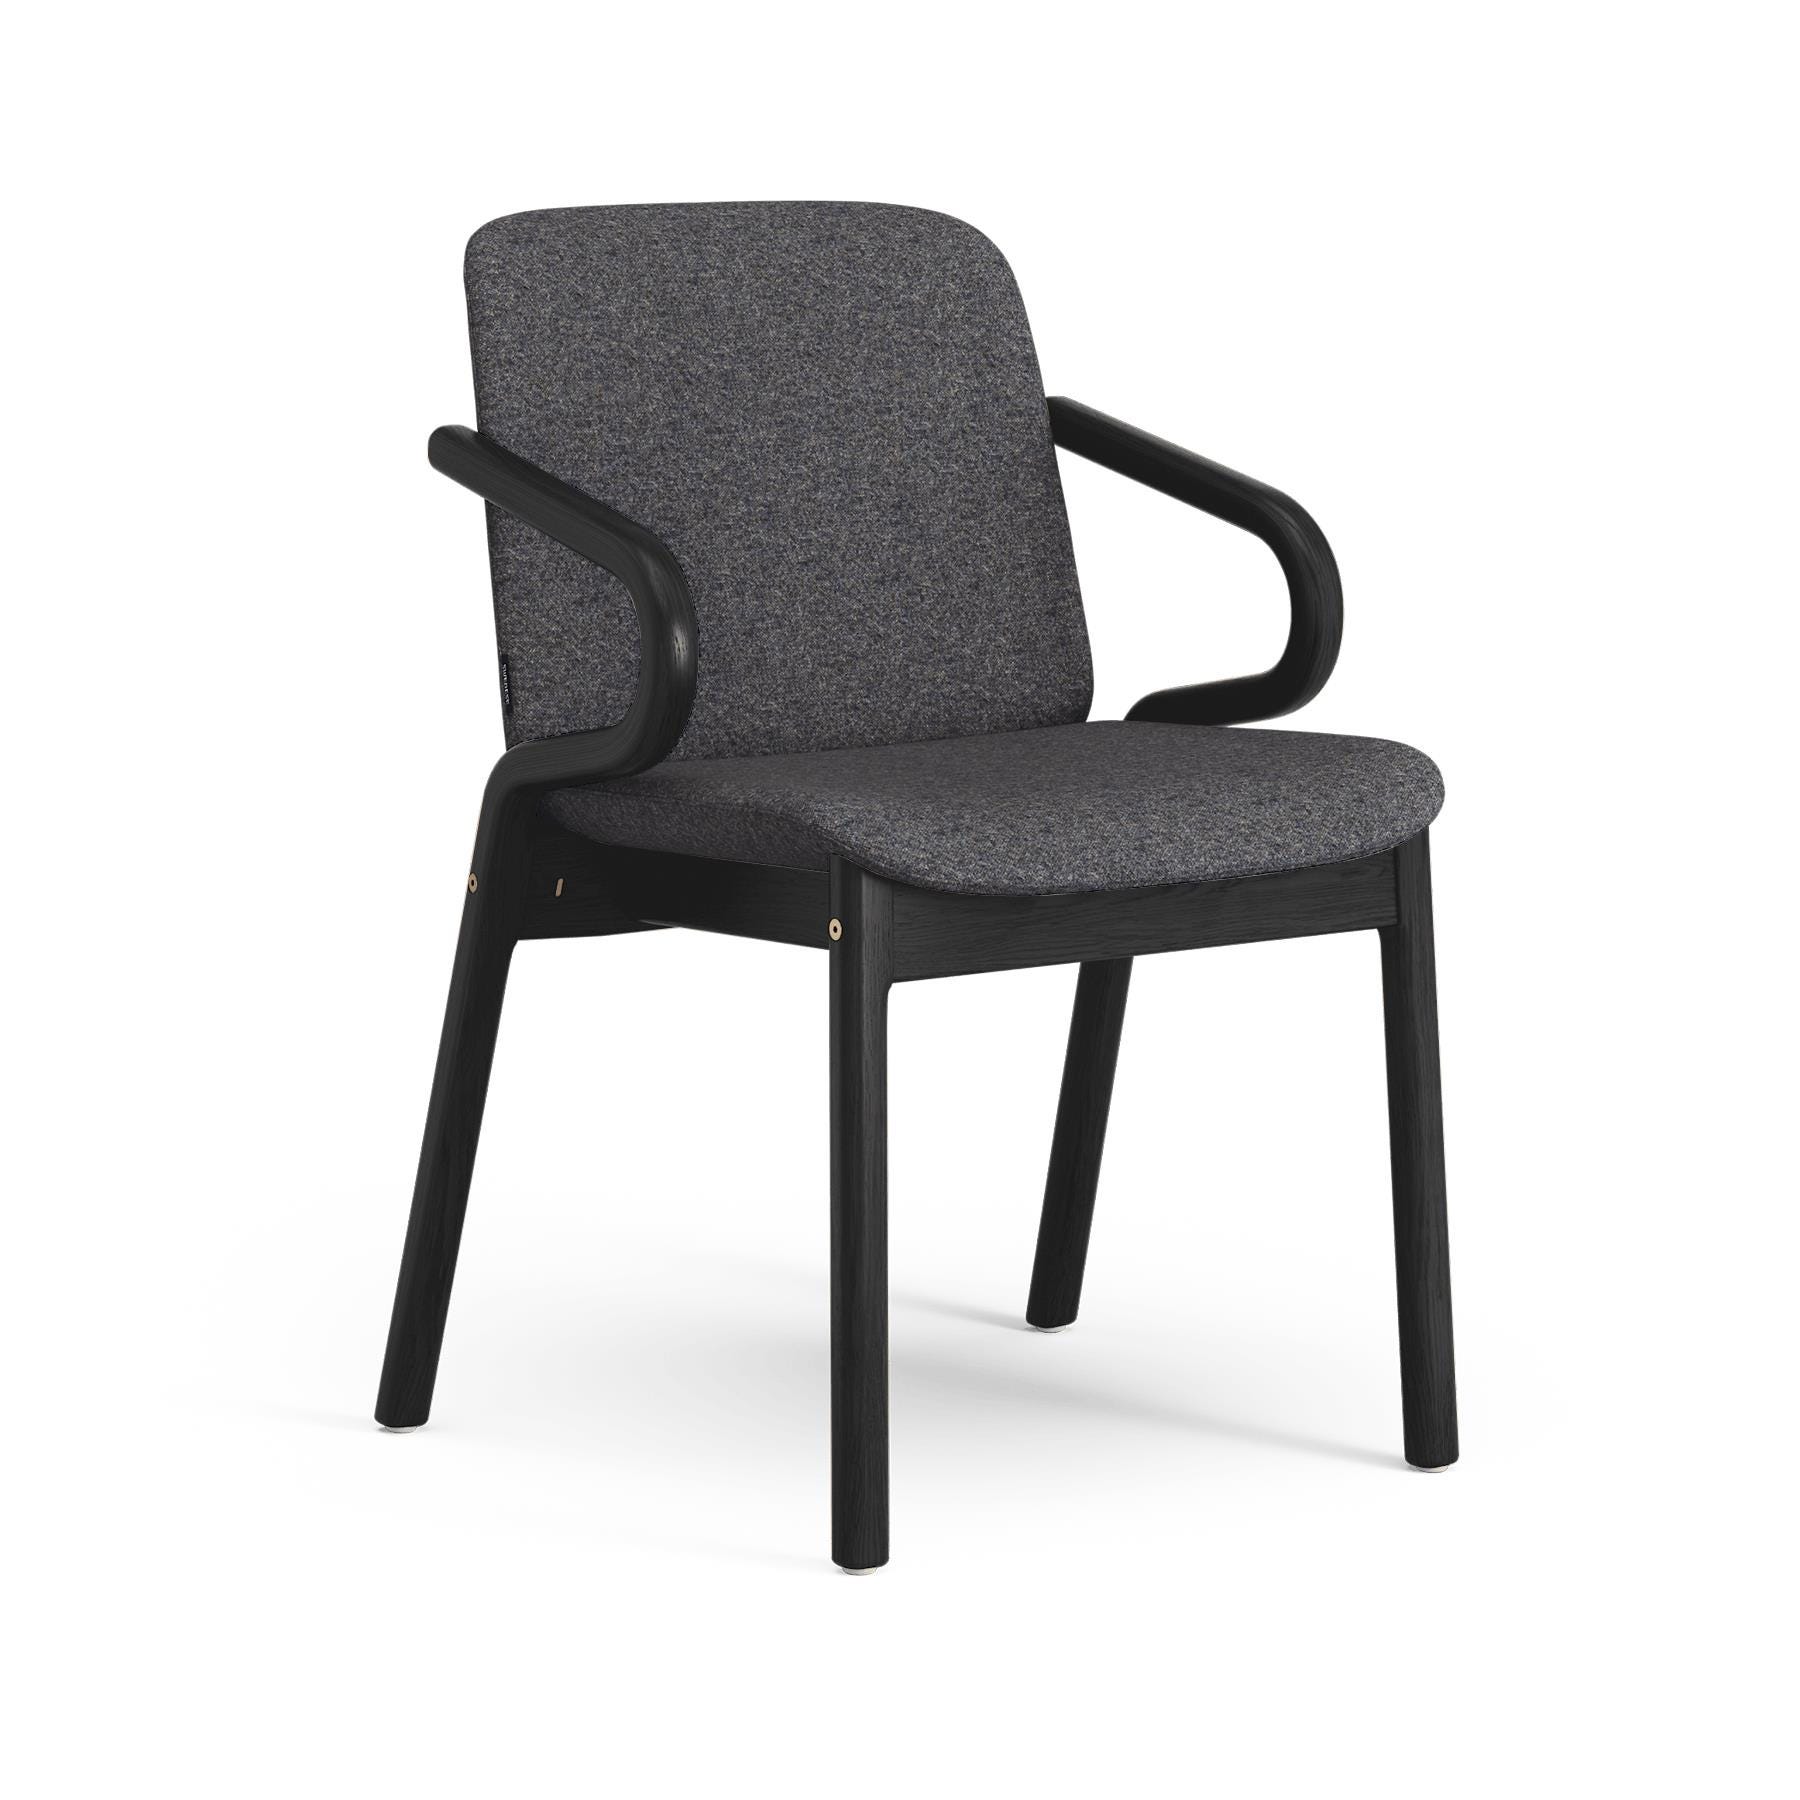 Swedese Amstelle Armchair Black Ash Bardal 770 Grey Designer Furniture From Holloways Of Ludlow